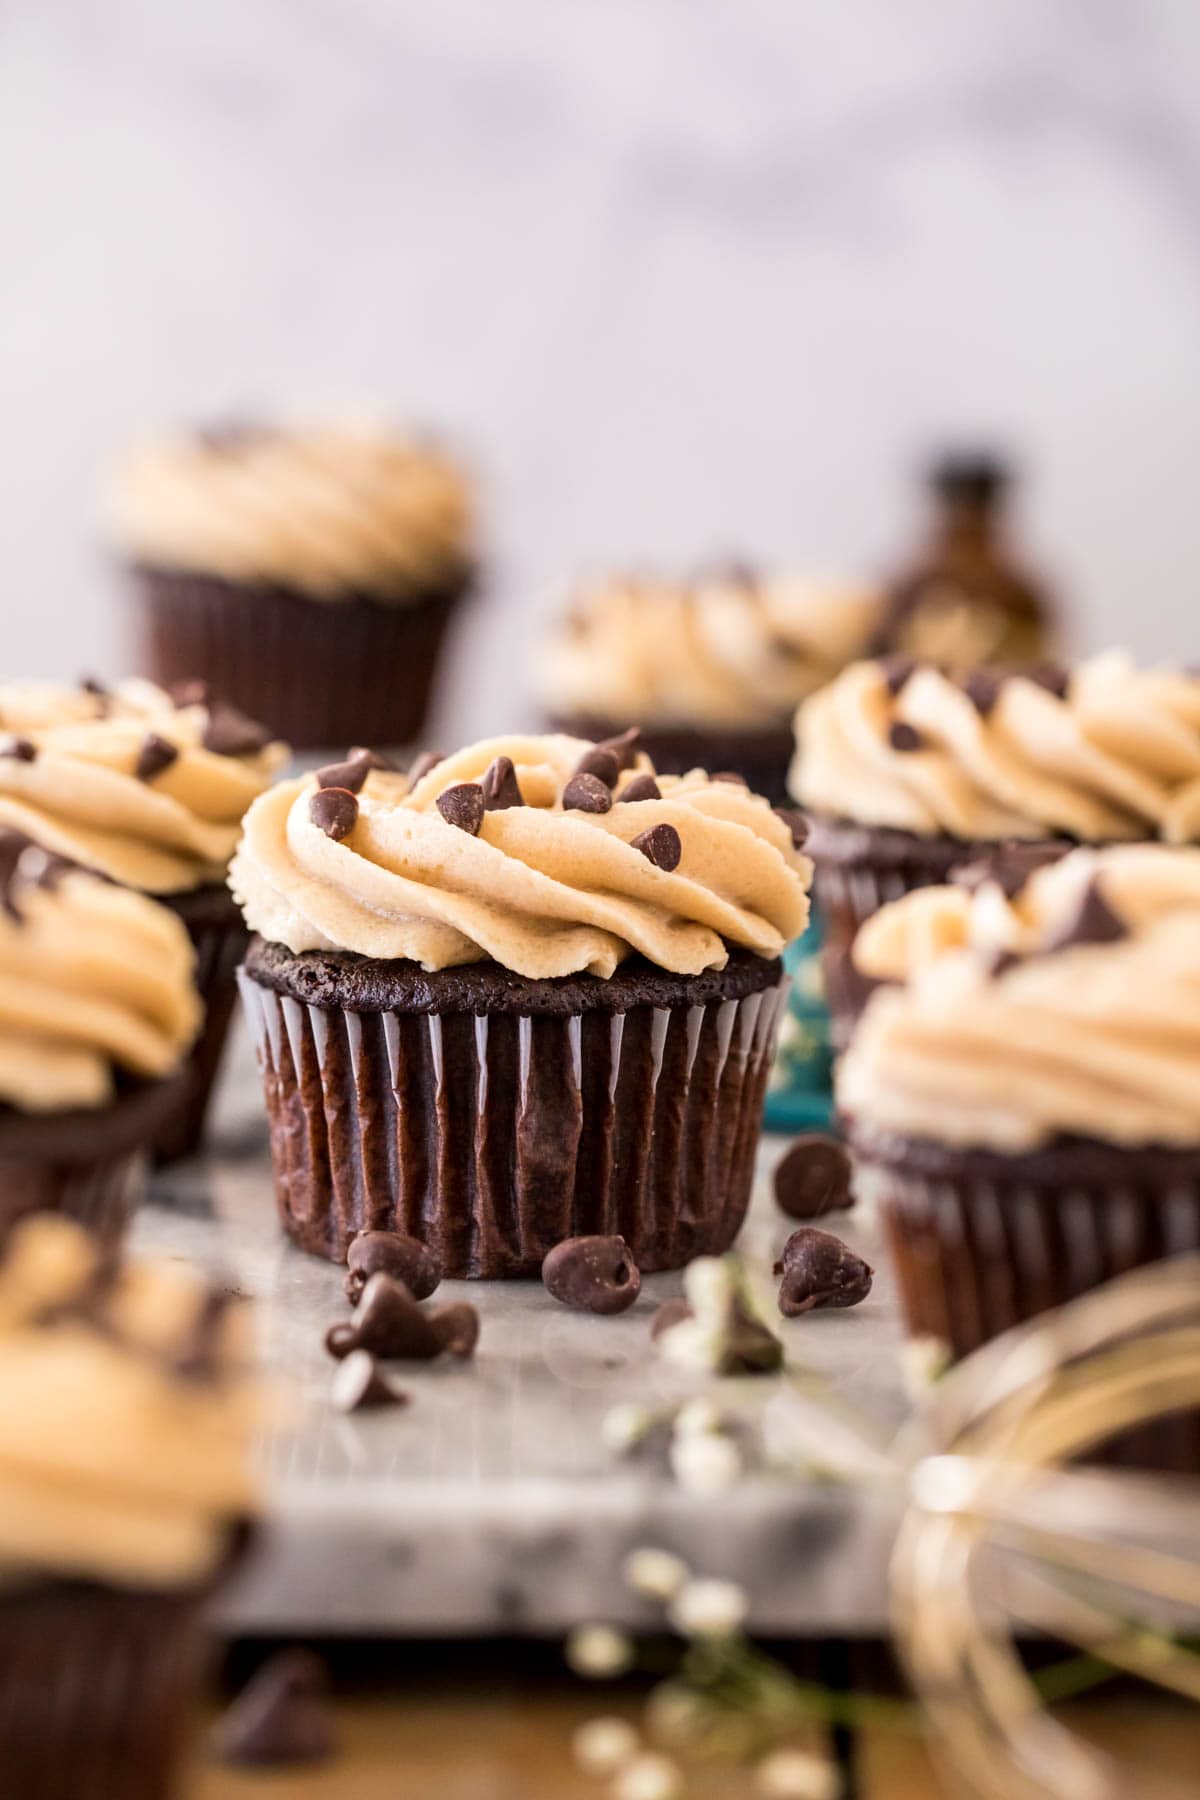 Cookie dough frosting on chocolate cupcake